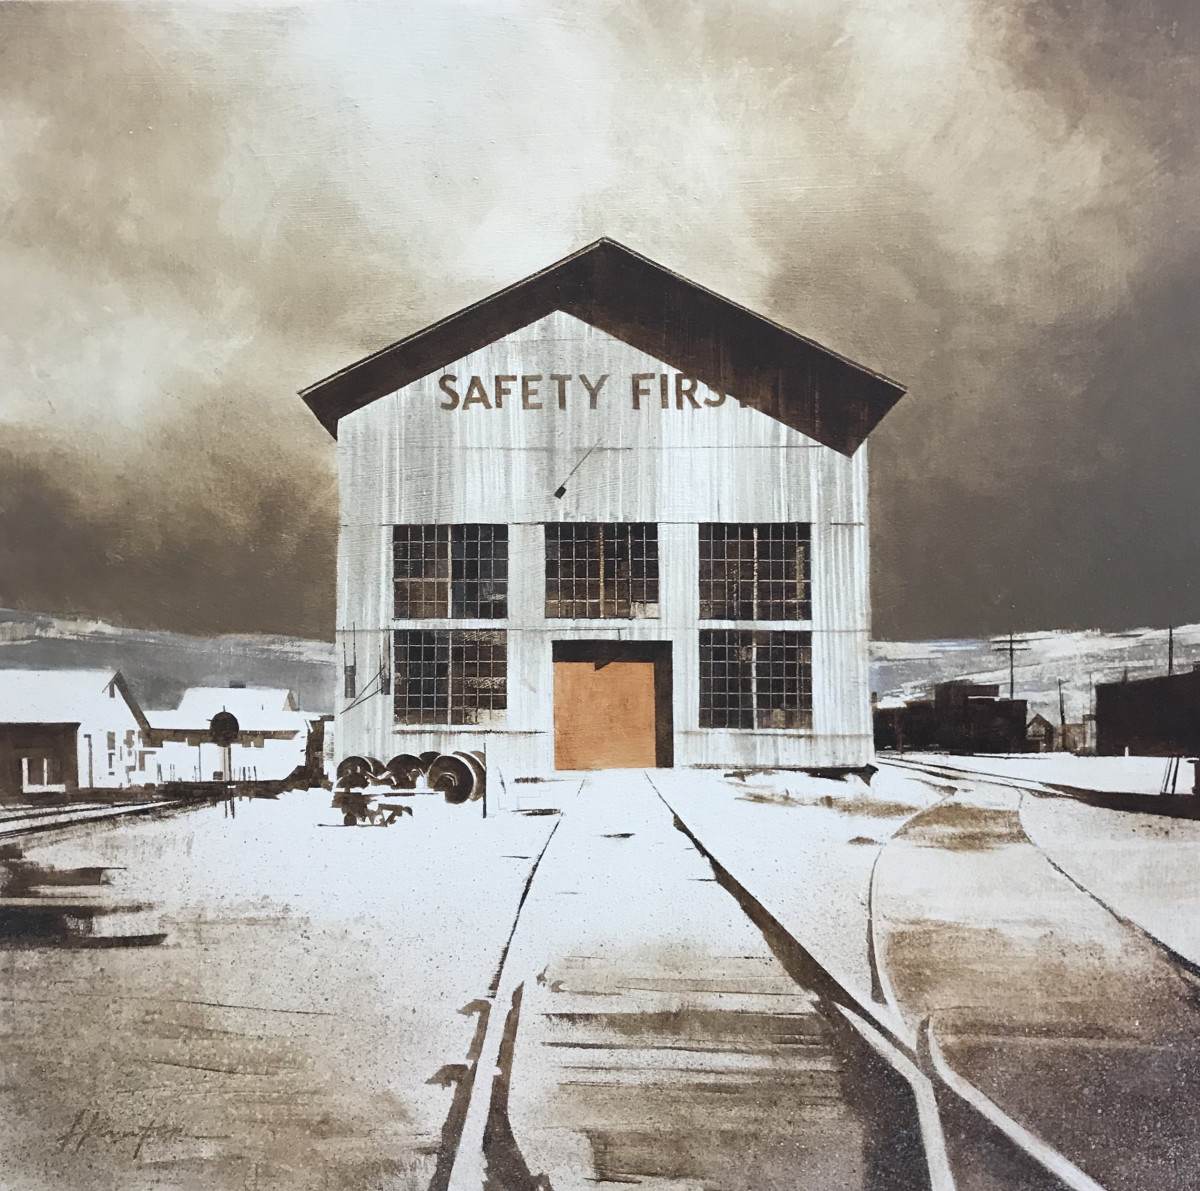 SAFETY FIRST (ELY, NV) by Charlie Hunter 